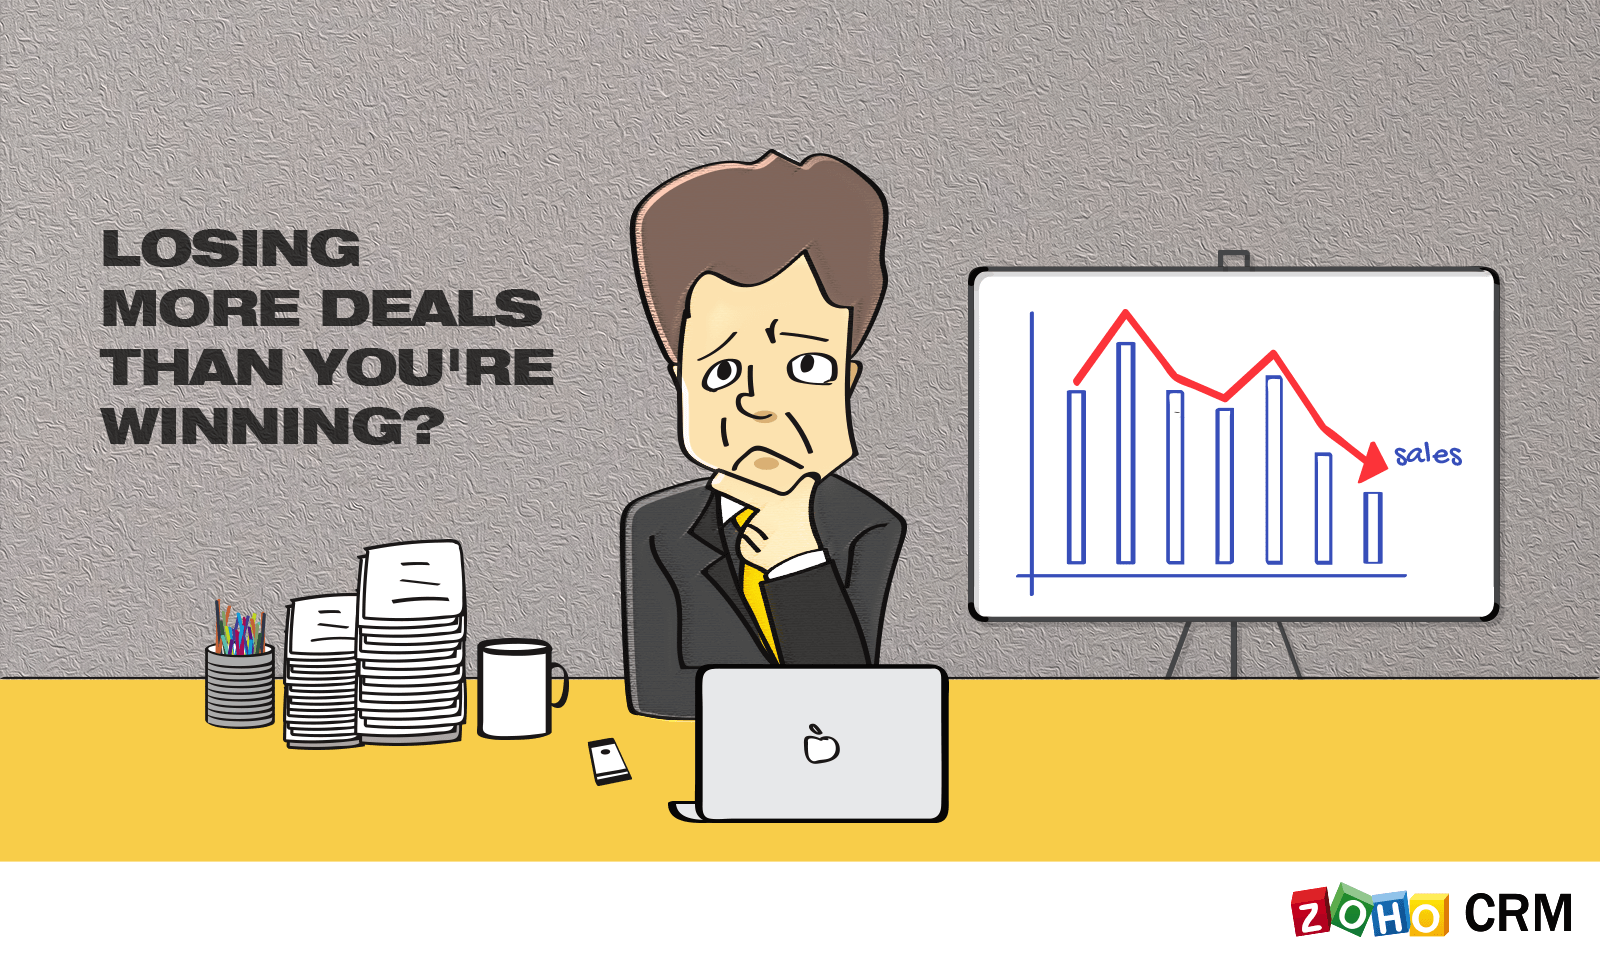 Losing More Deals Than You're Winning? The Problem Could Lie with Your Process, not Your People